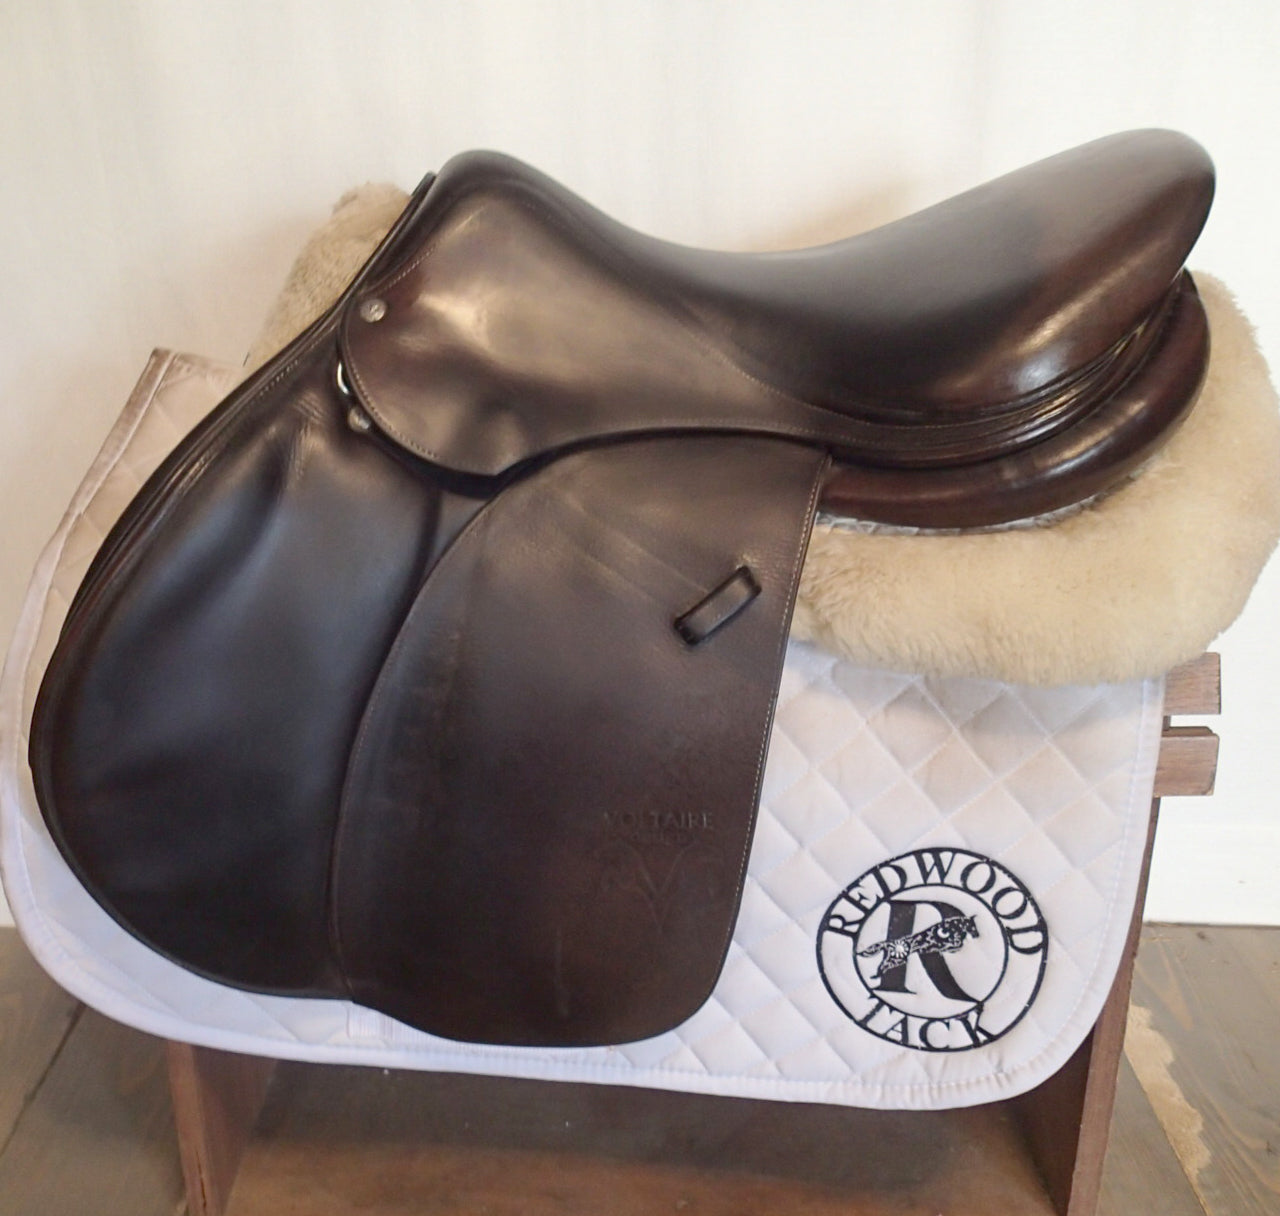 17.5" Voltaire Palm Beach Saddle - 2015 - 4AAA Flaps - 4.75" dot to dot - Pro Panels